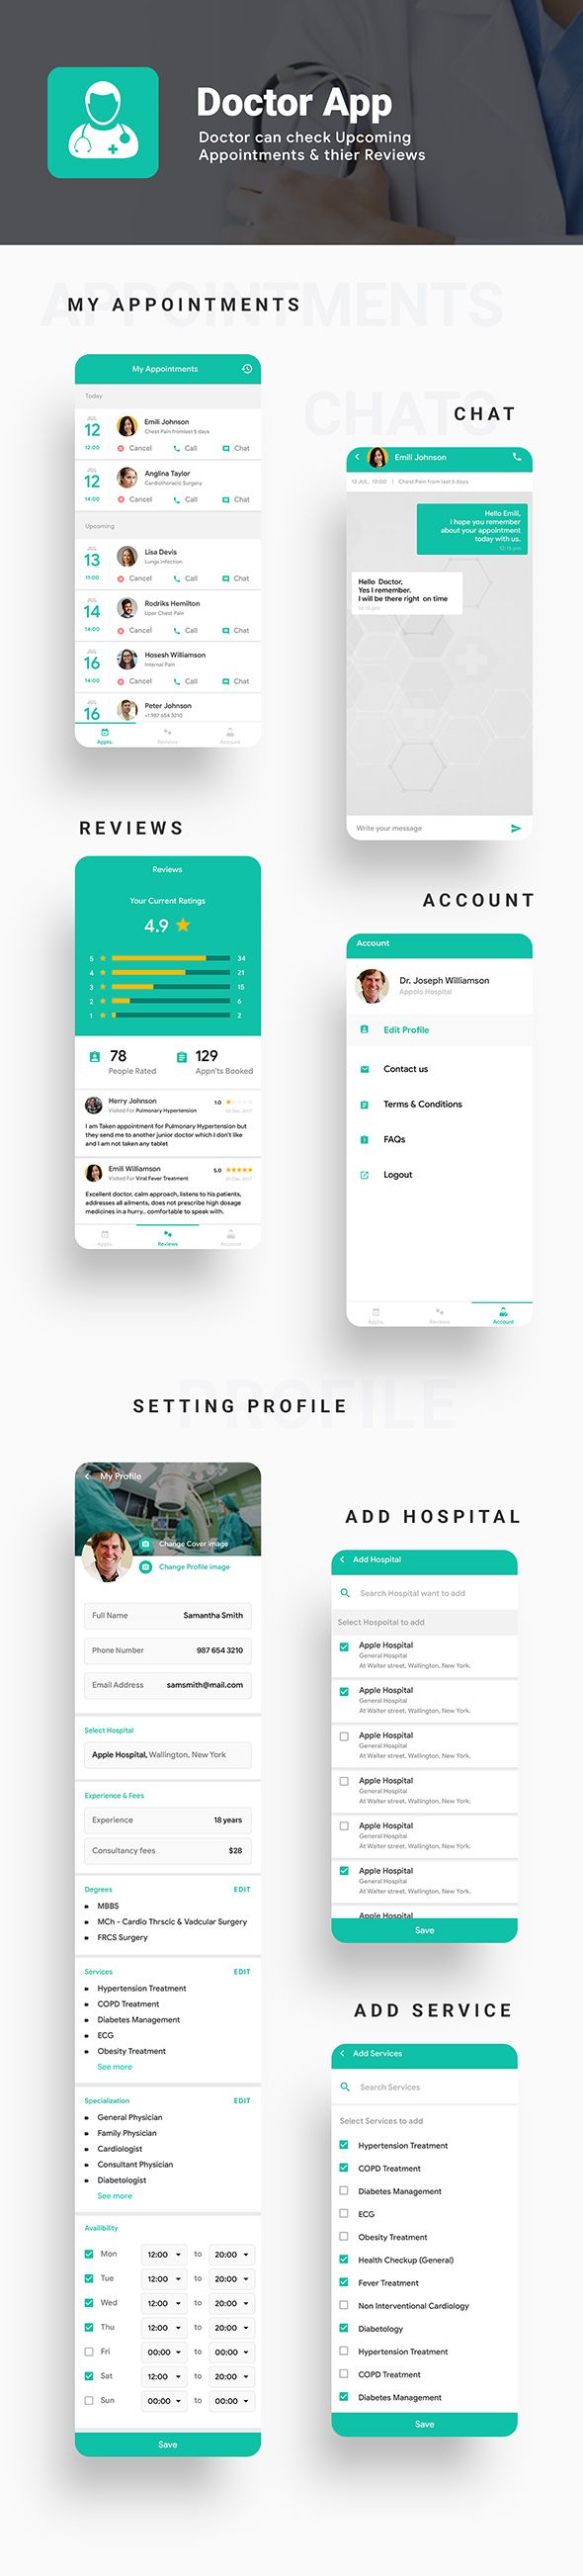 All in one Doctor Android App Template + iOS Template  (HMTL + Css) IONIC 5 | DoctoWorld - 5